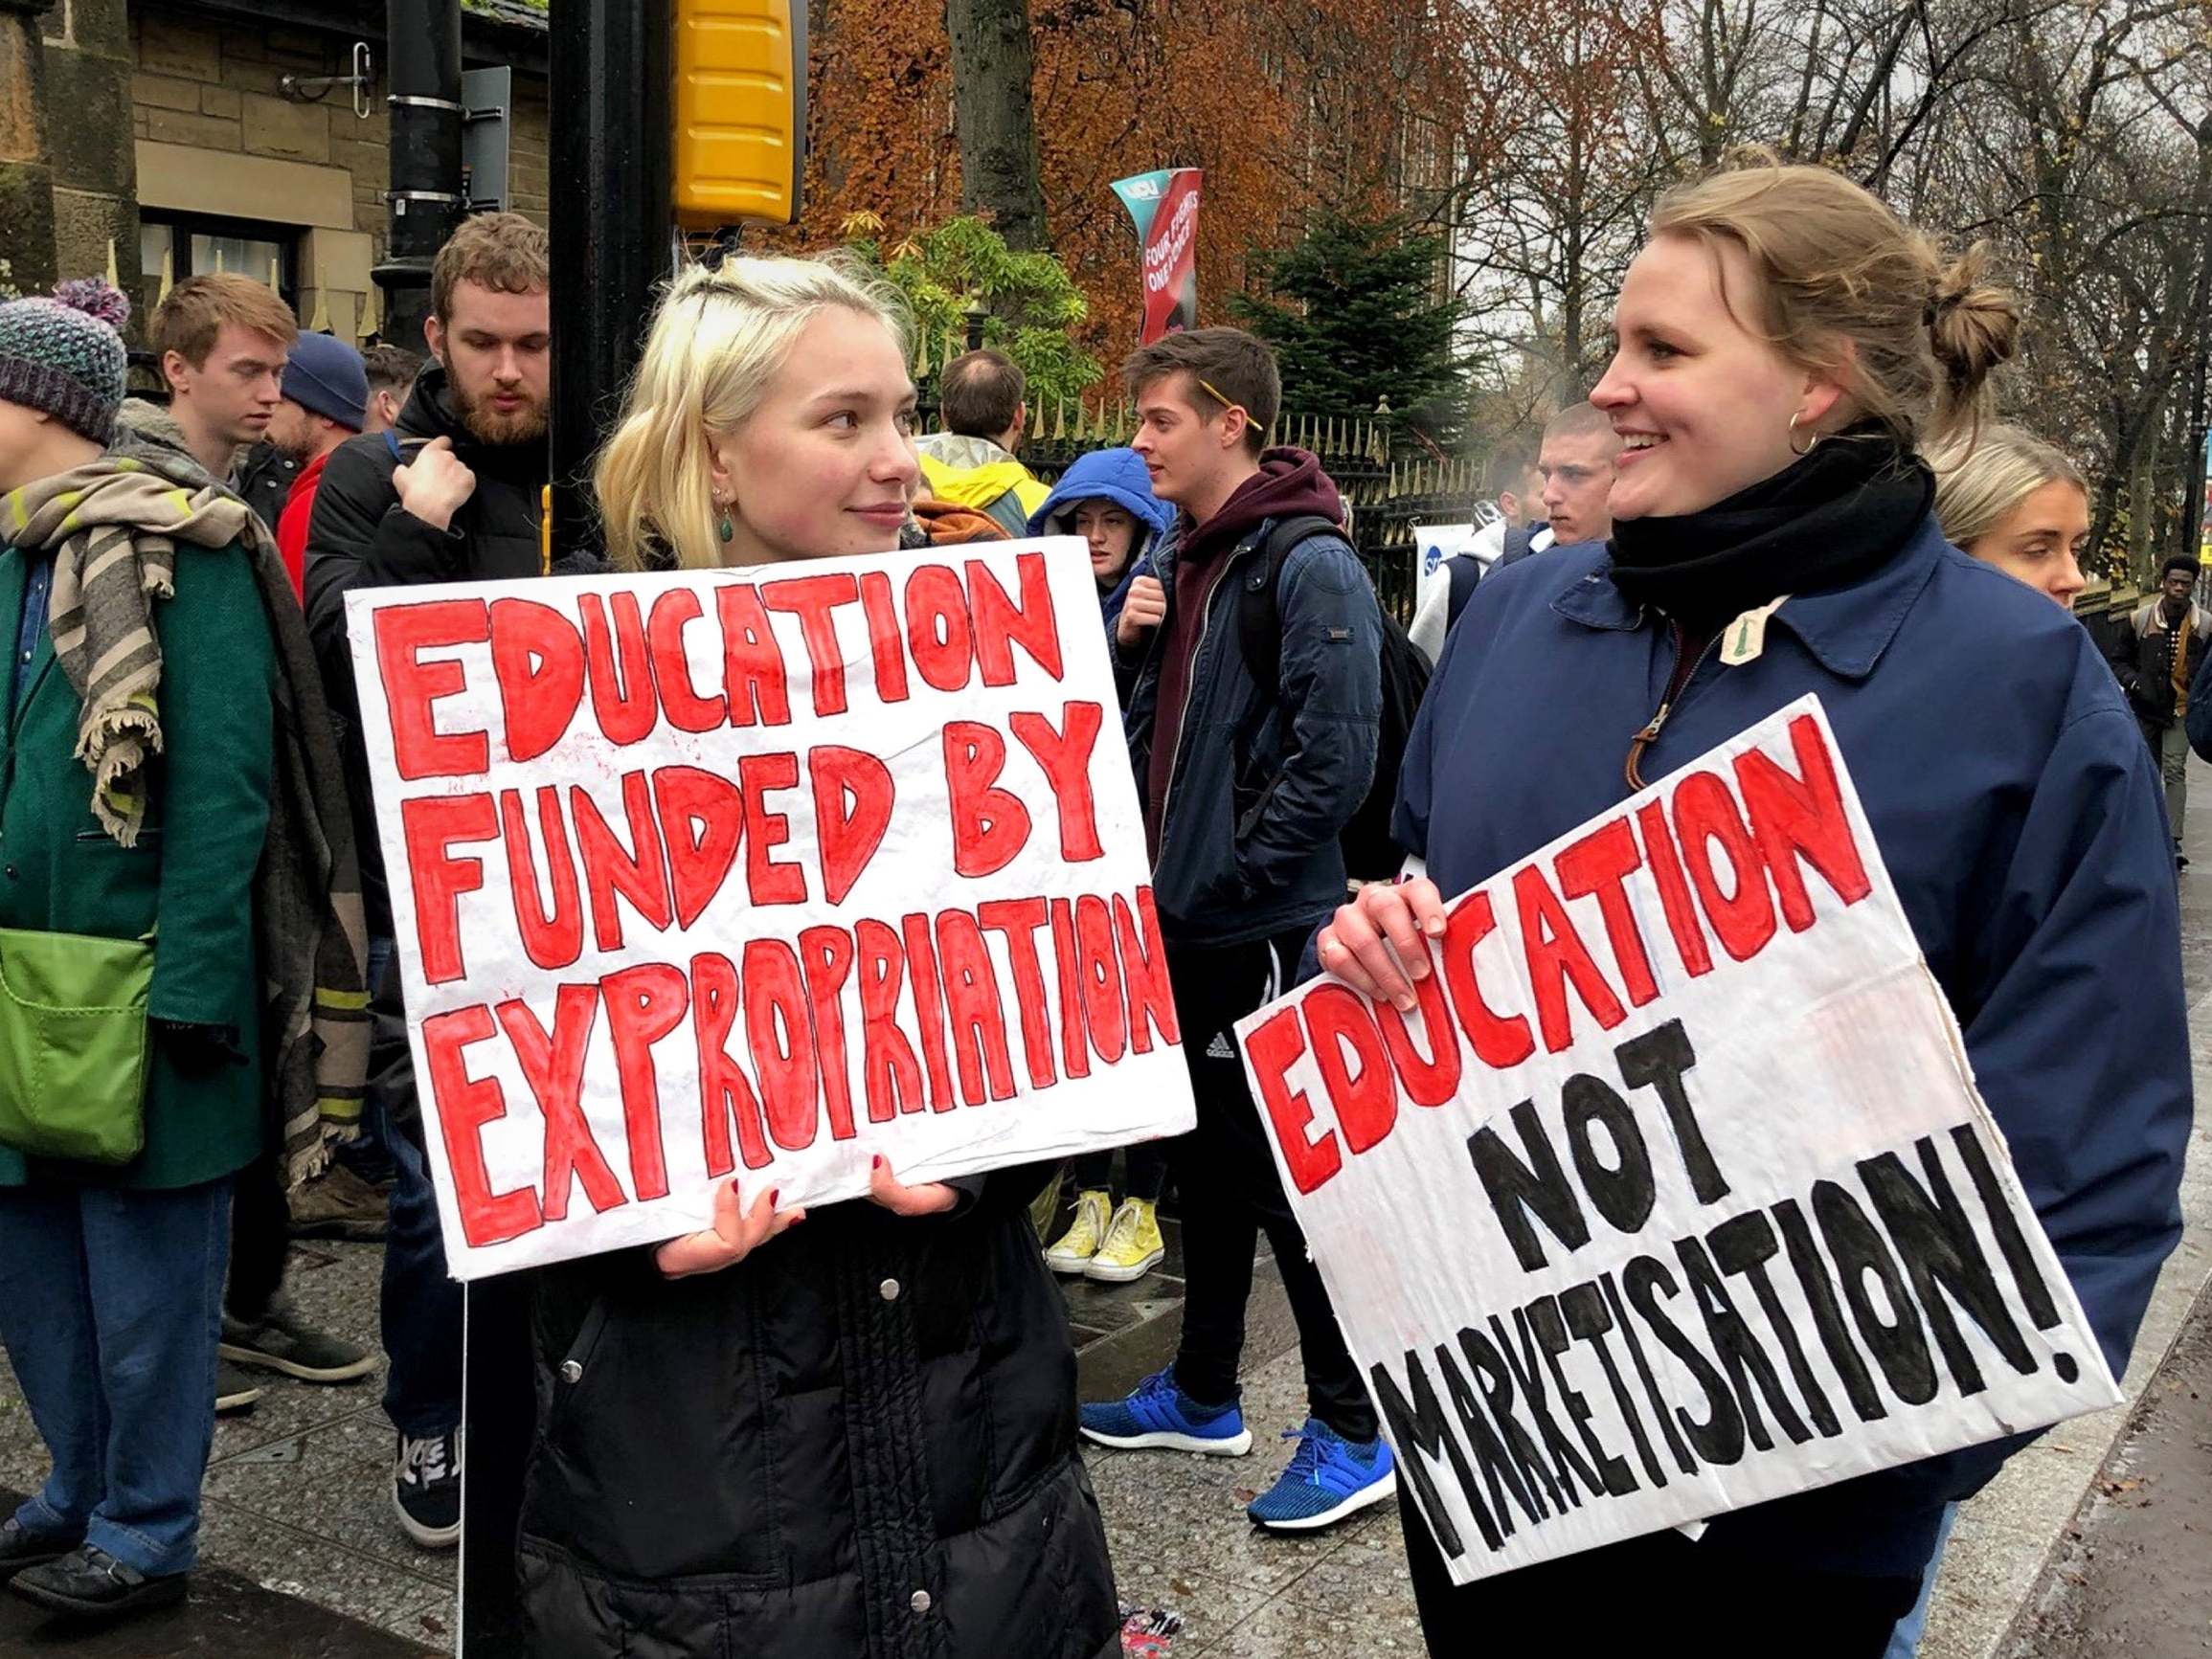 University strikes: Students face punishment after supporting staff walkouts